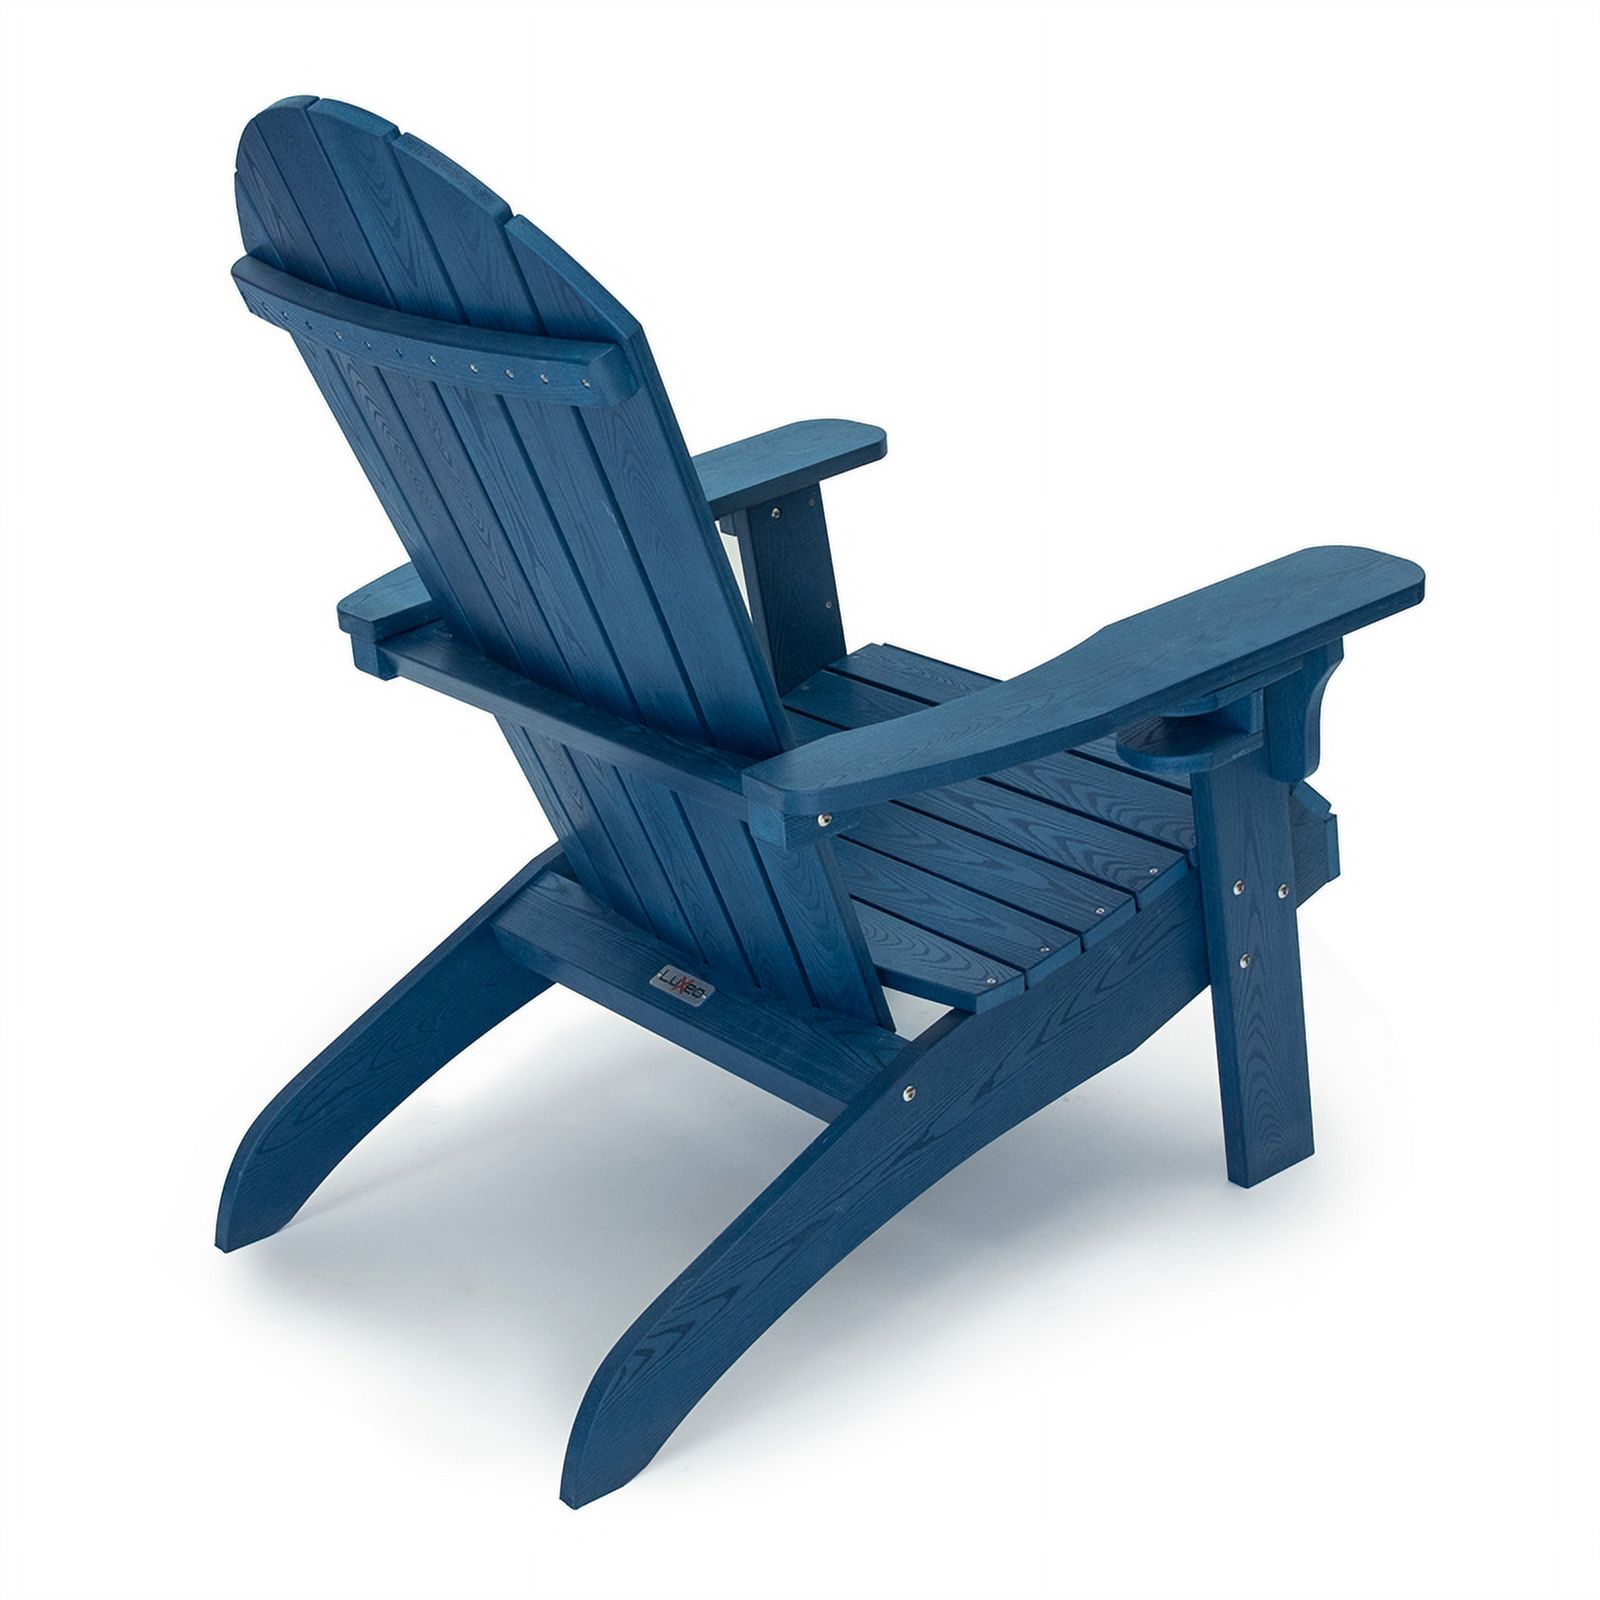 Westwood Navy All Weather Outdoor Patio Adirondack Chair - image 4 of 11